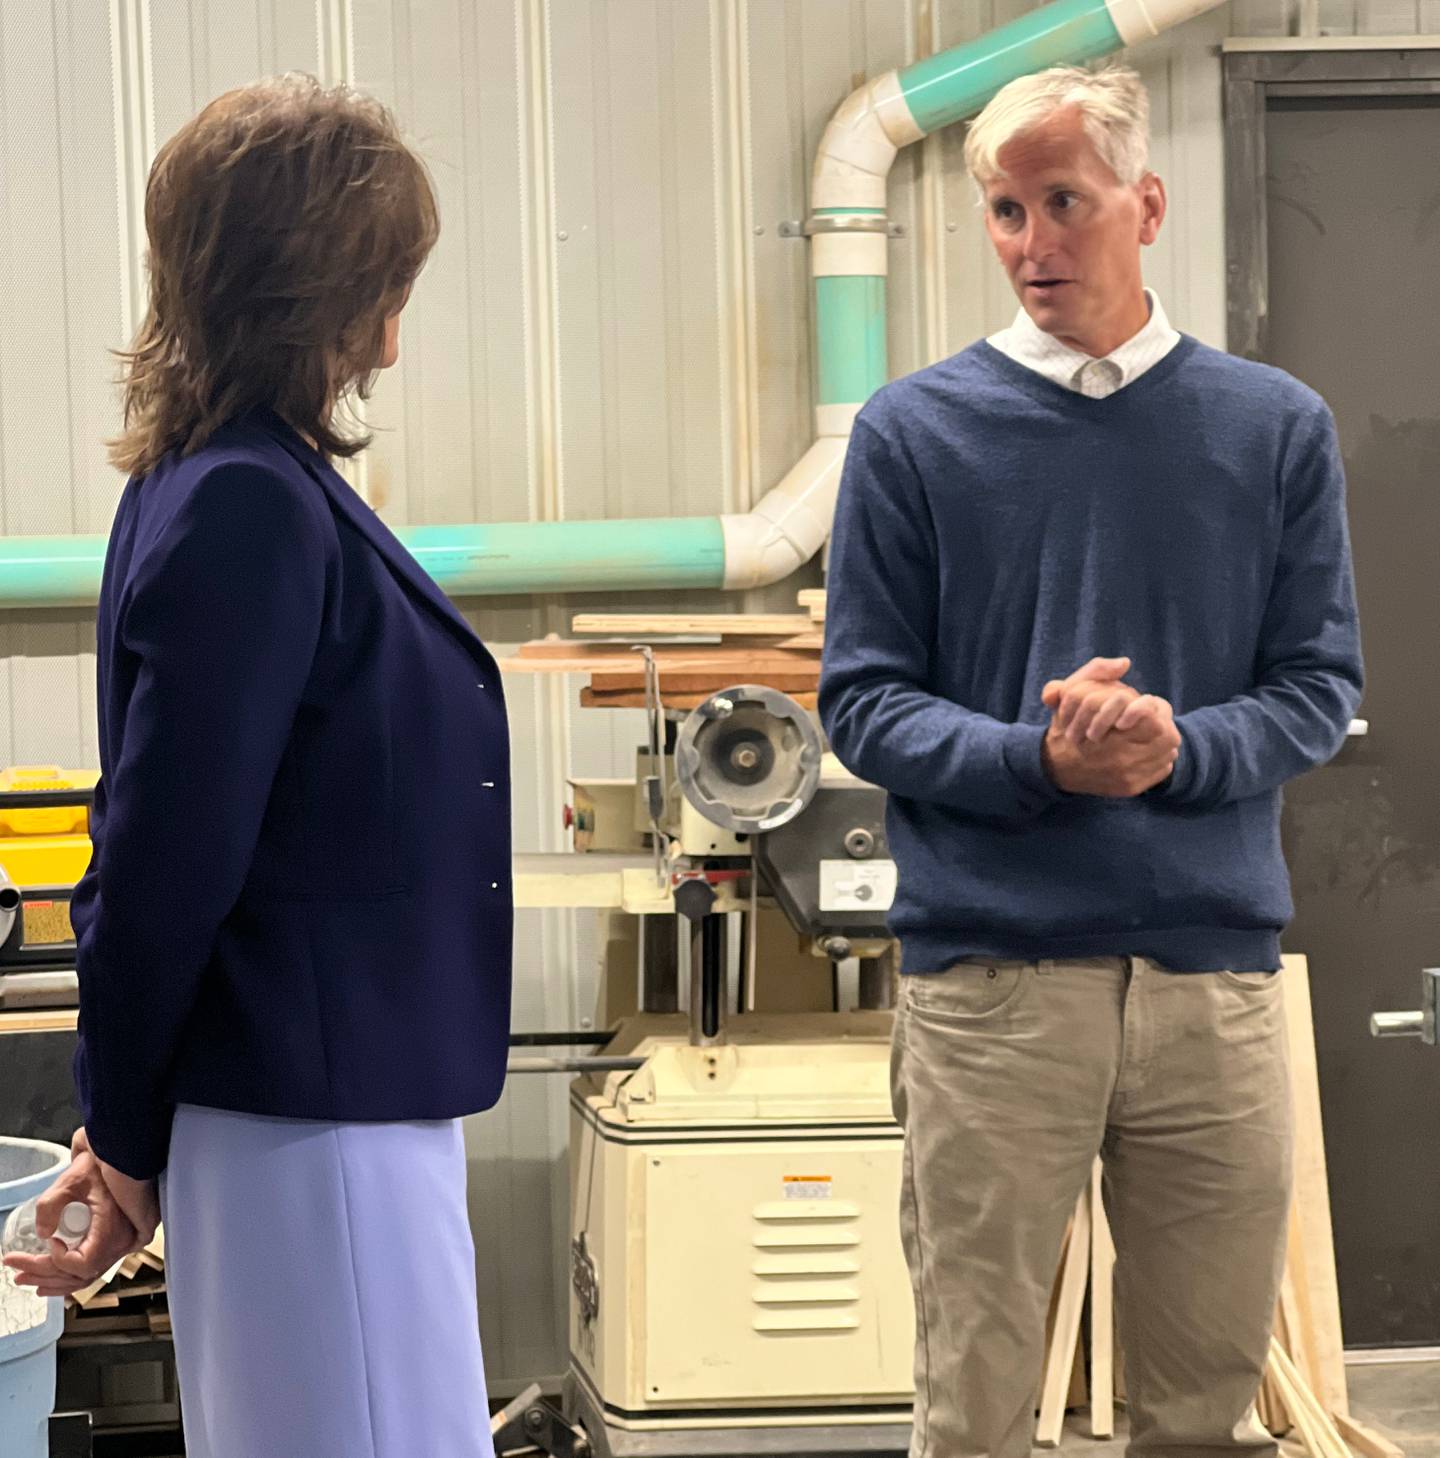 US Rep. Cheri Bustos joins Chris Scott, President of Morrison Tech, during a visit September 7 where she presented the school with $1.5 million for the Automation and Intelligent Process Control Systems major.